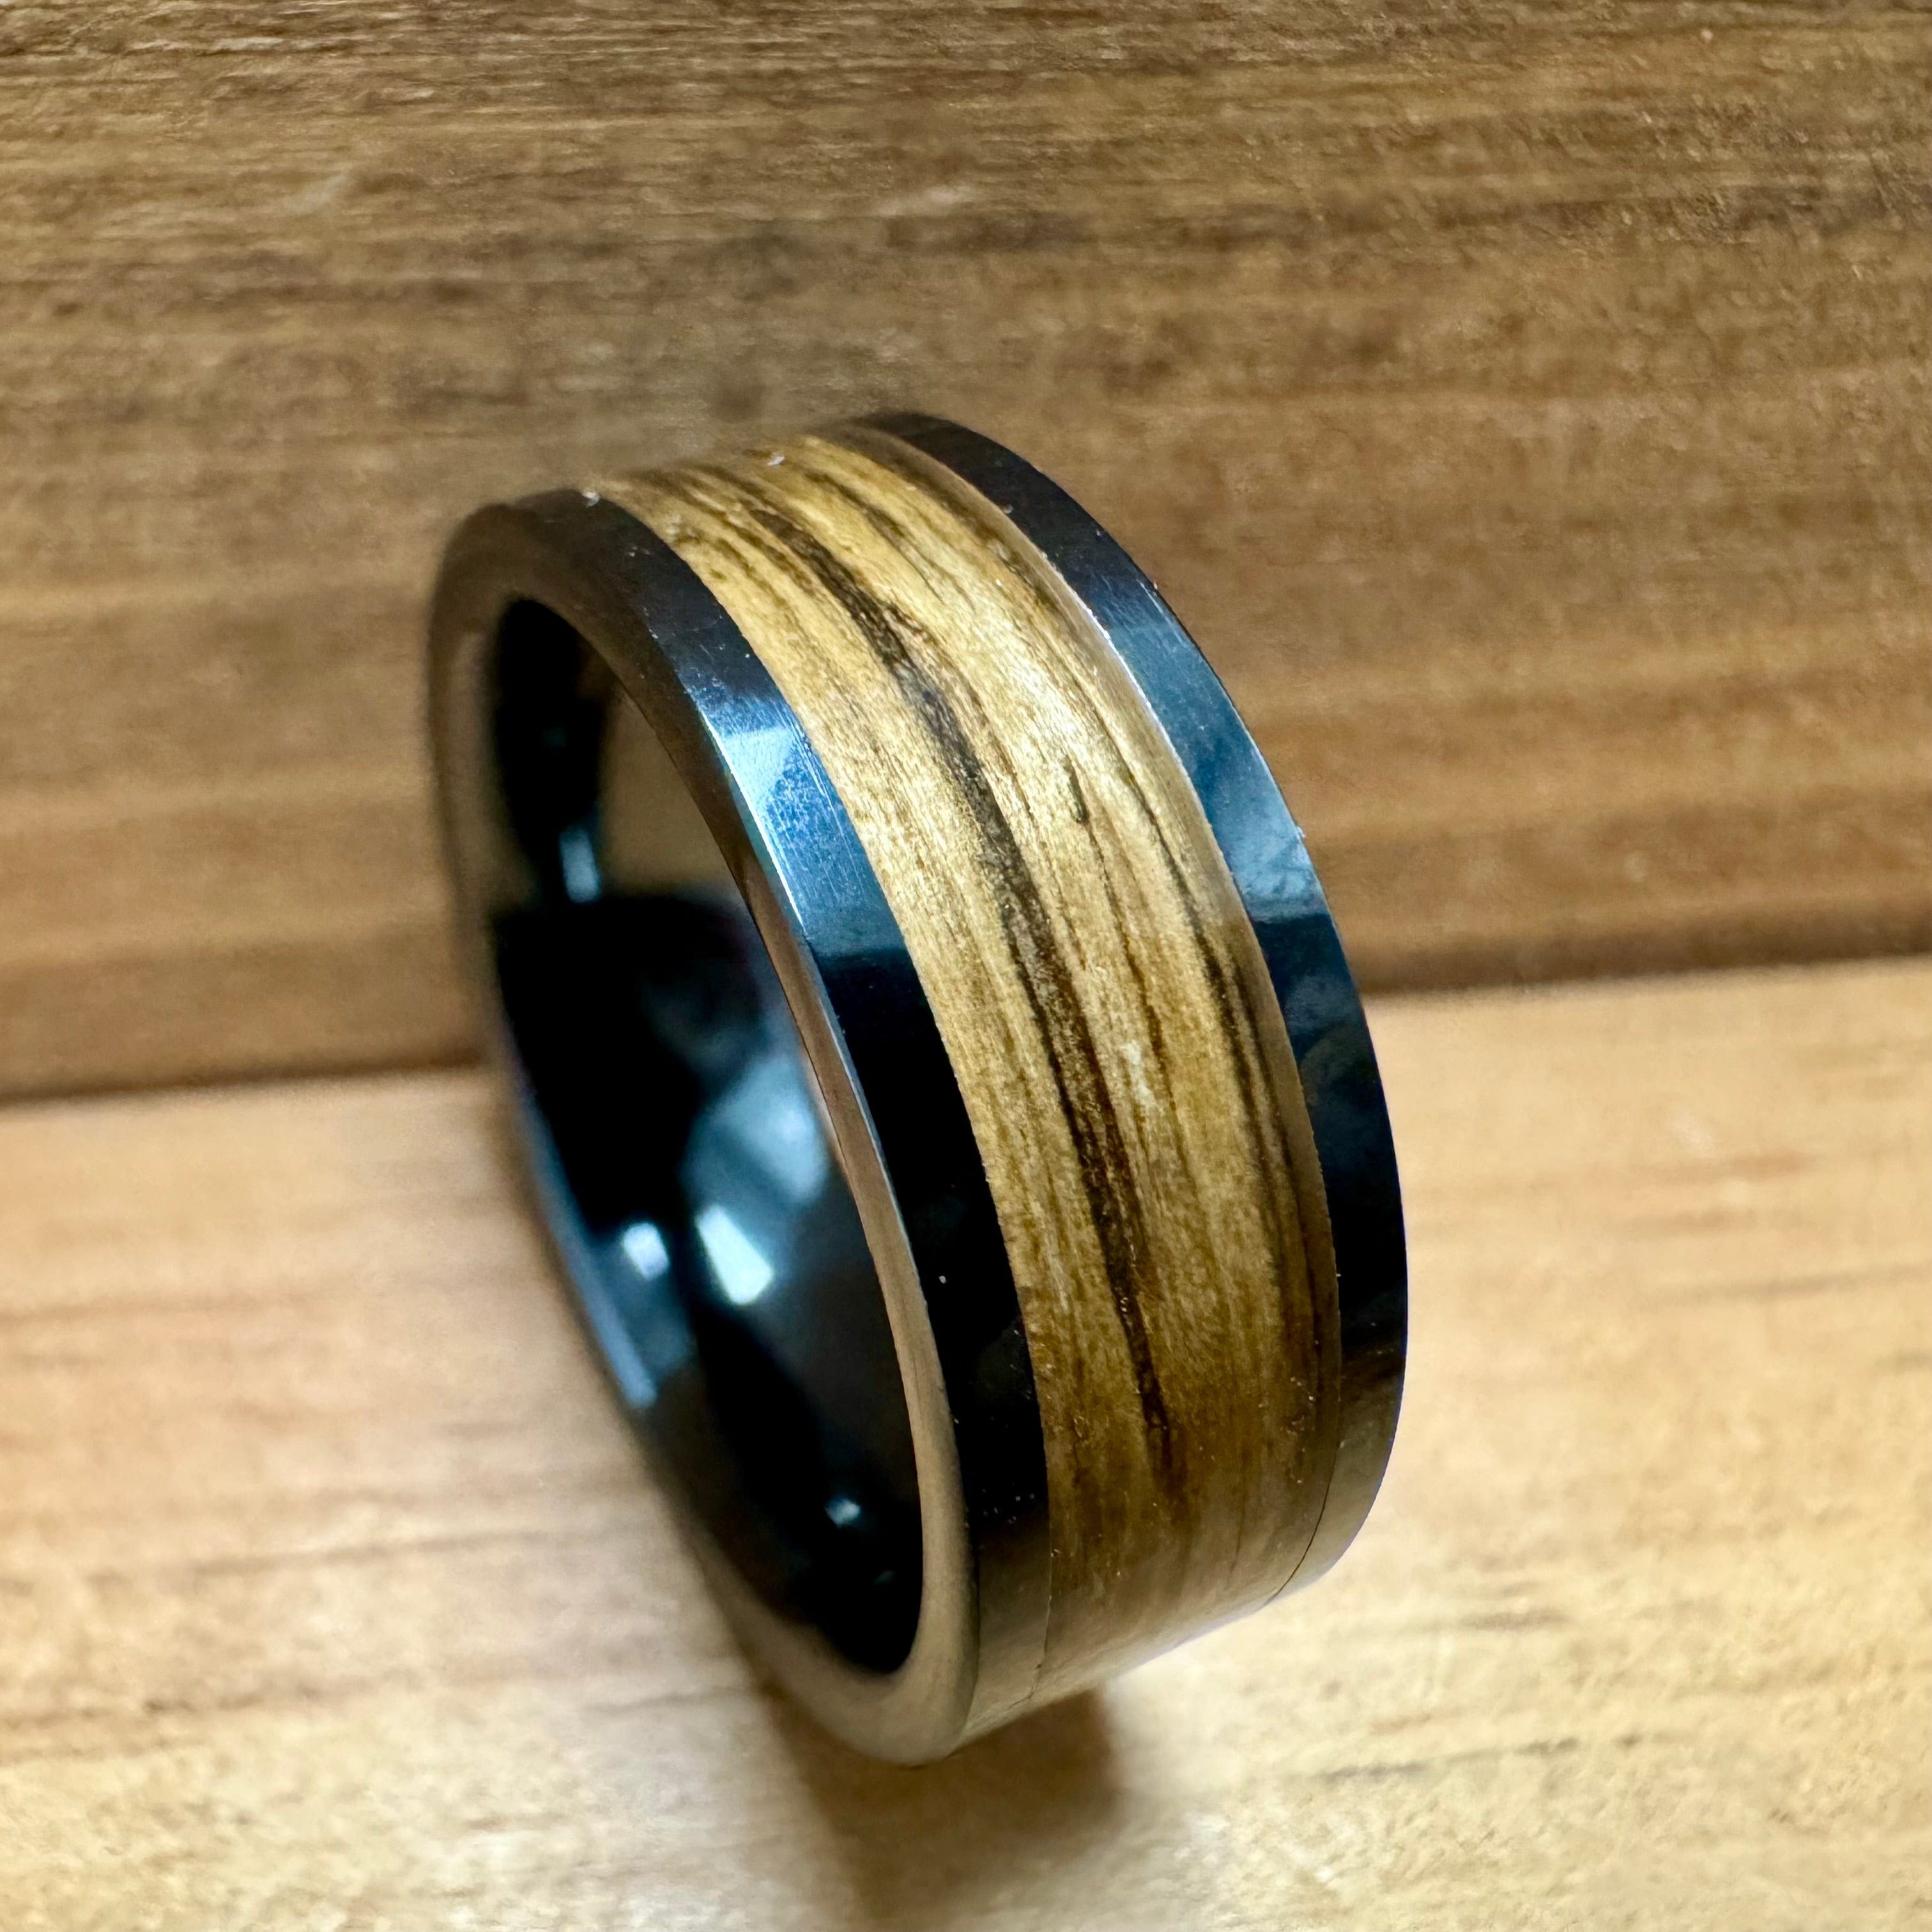 BW James Jewelers ALT Wedding Band “The Bourbon” 100% USA Made Build Your Own Ring Black Diamond Ceramic Pipe Cut 8mm High Polish Ring